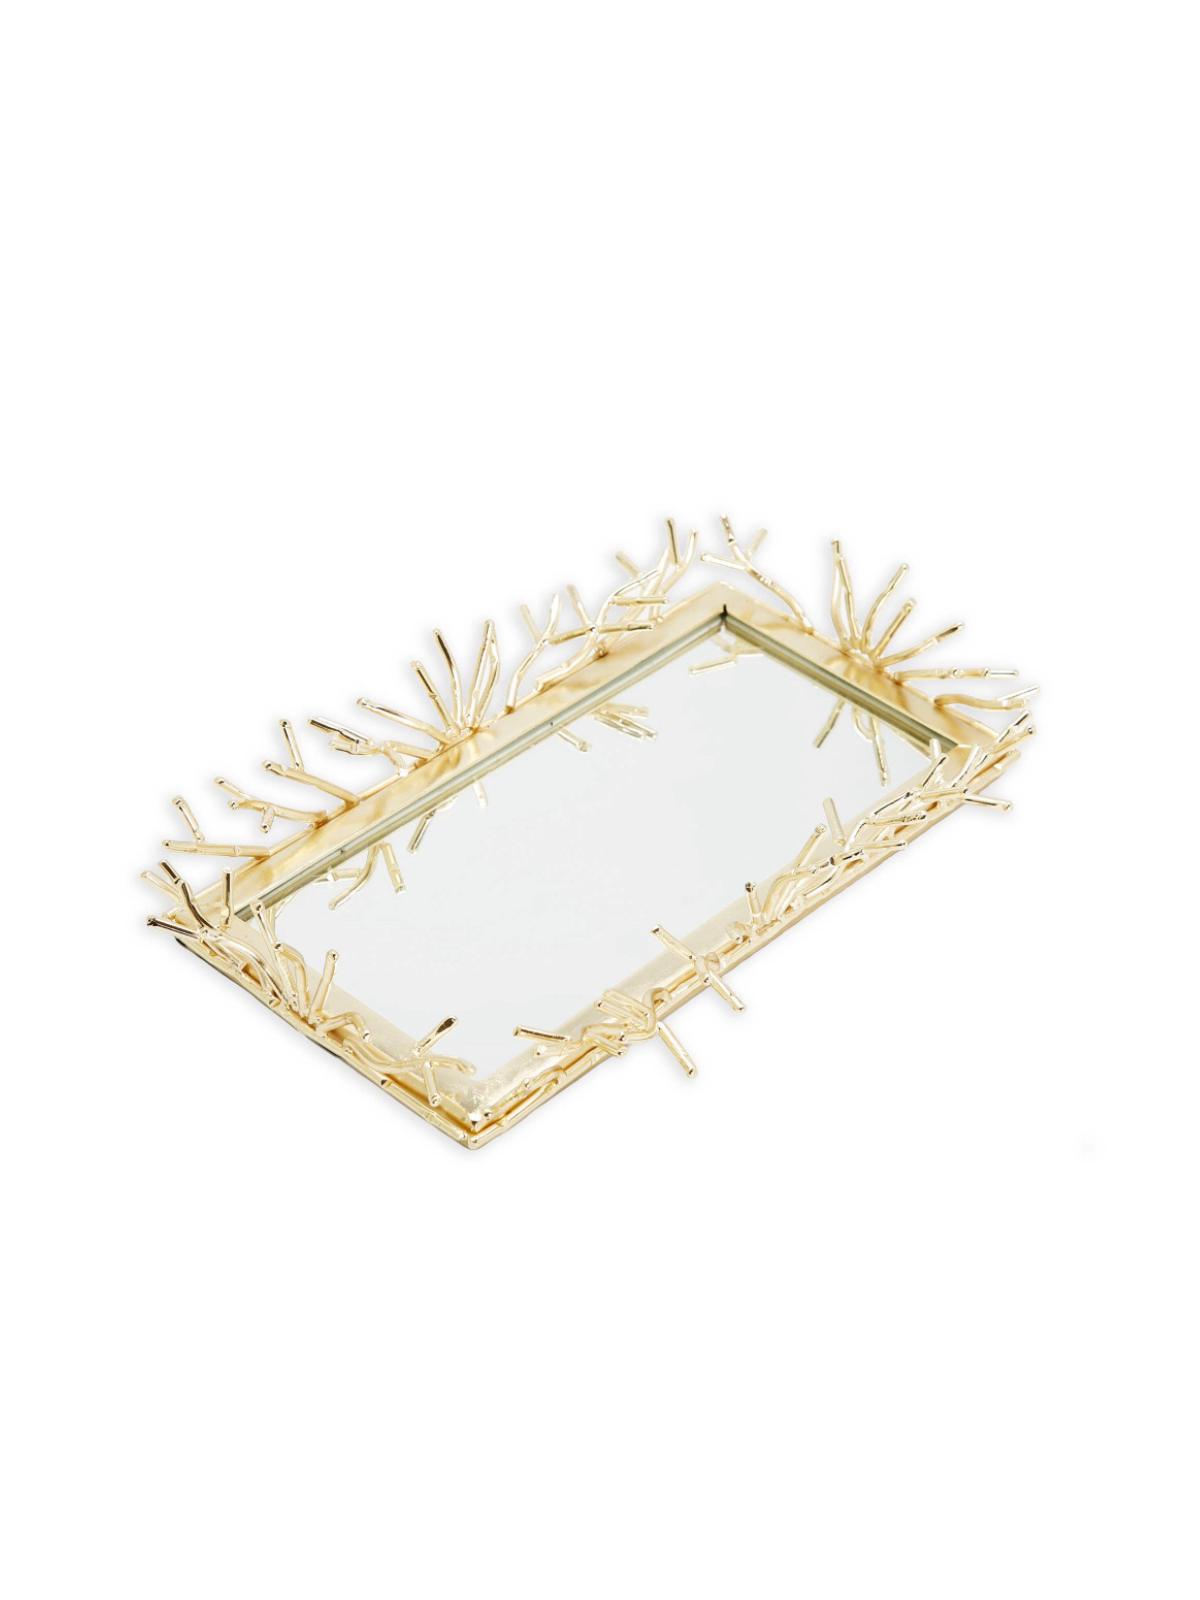 Rectangular Decorative Mirror Tray with Stainless Steel Gold Twigs Designed Borders.